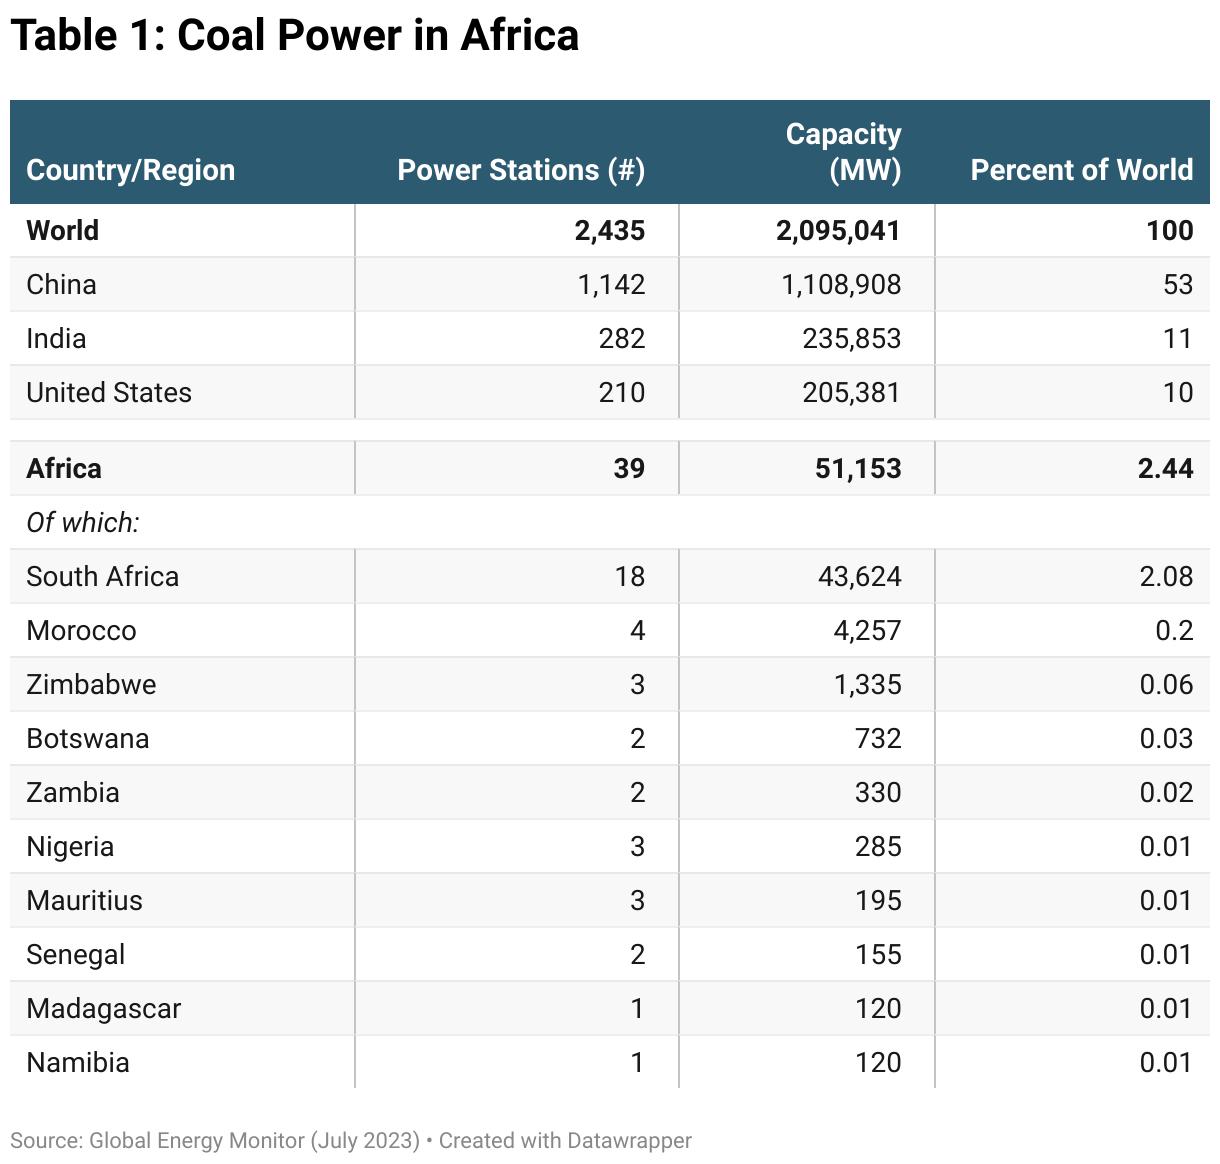 Table of coal power by country and region in Africa.